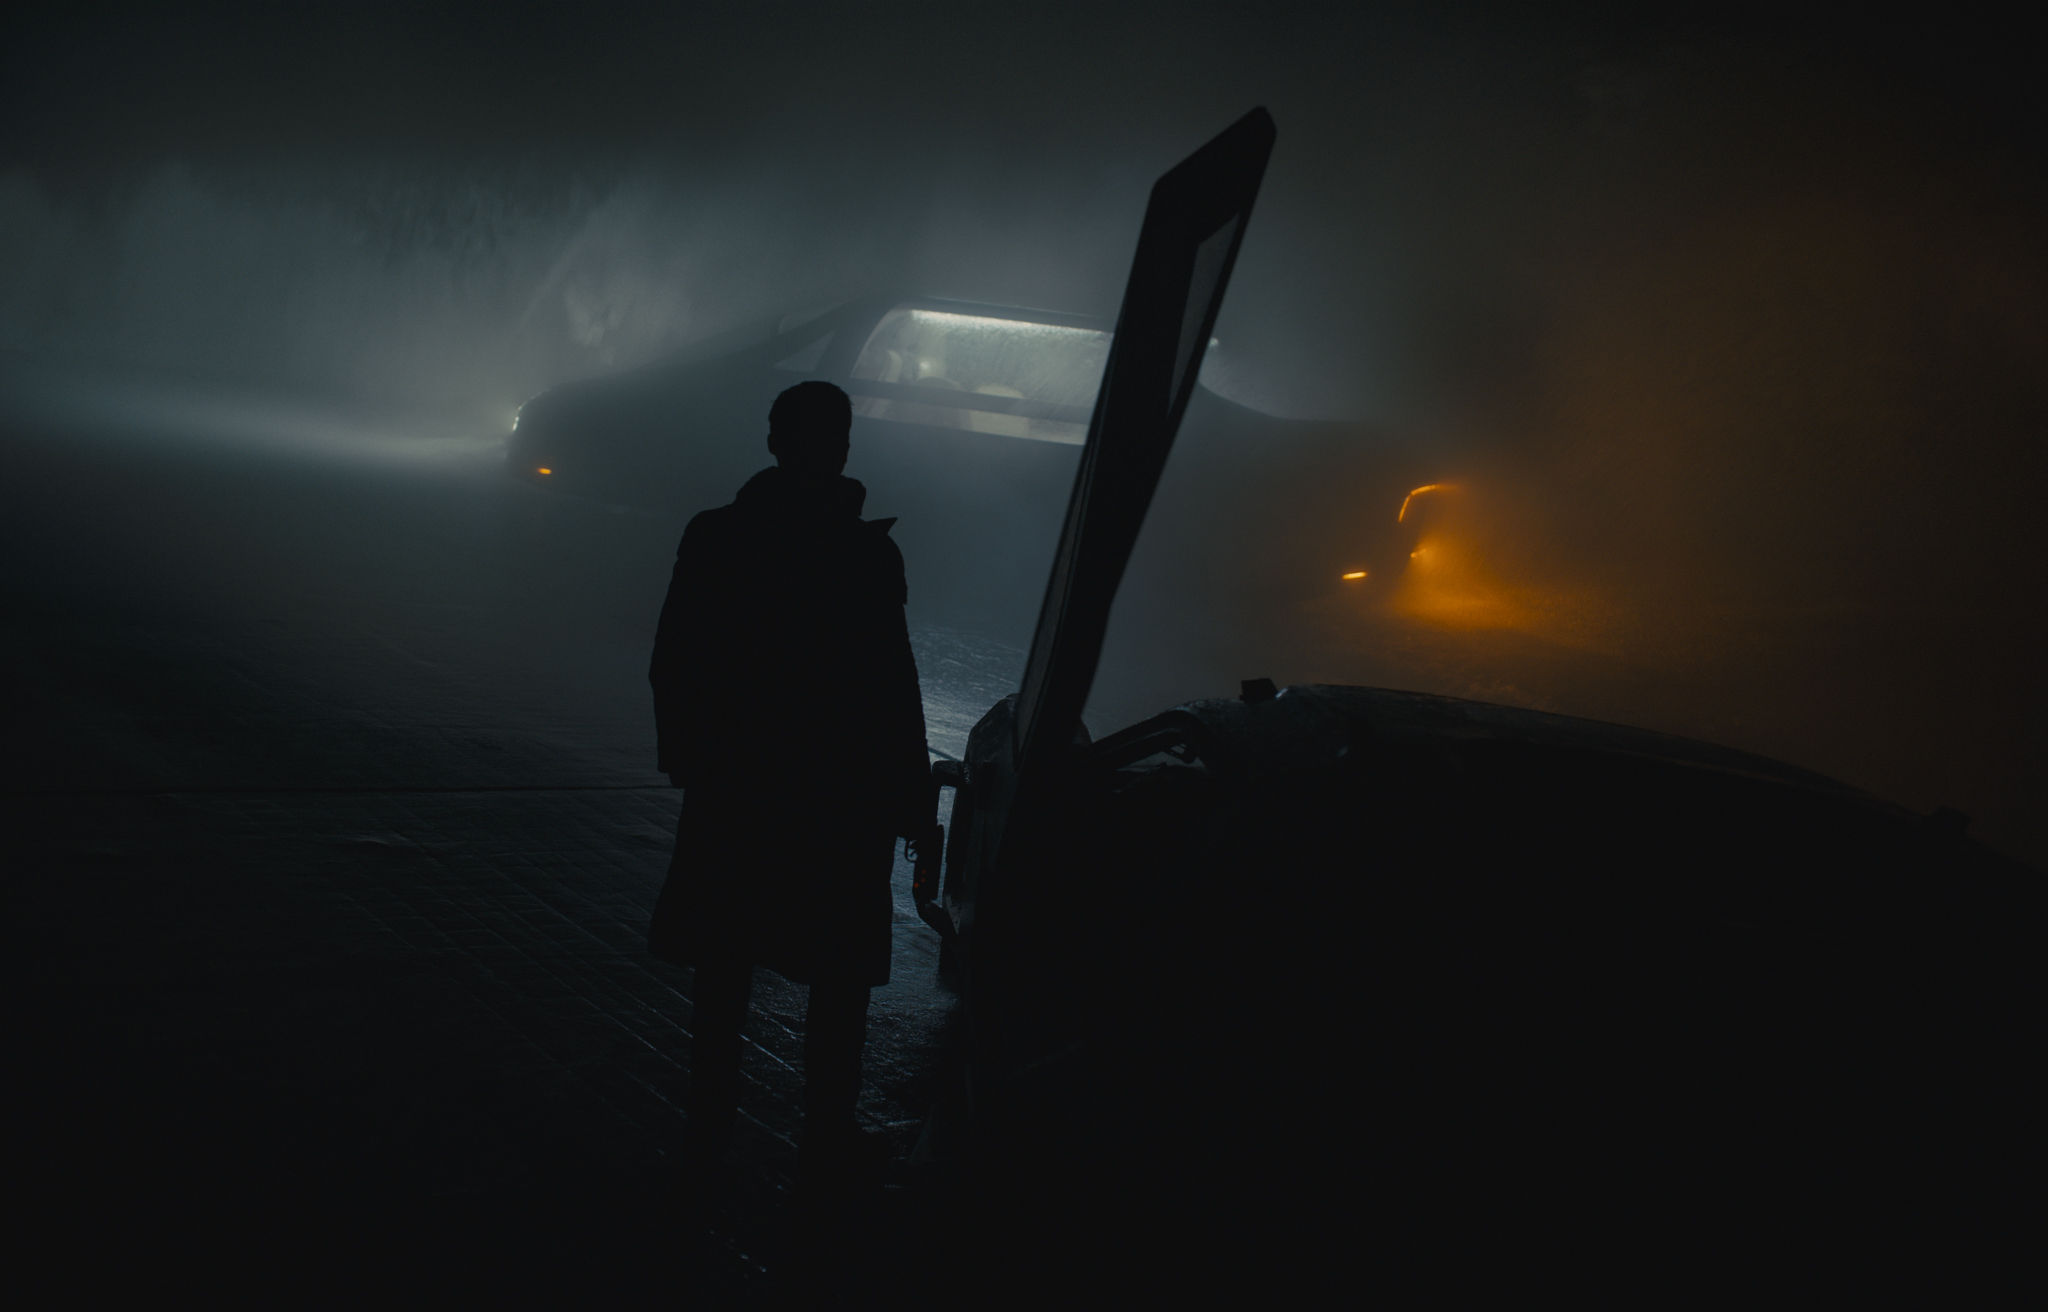 Free Blade Runner 2049 Wallpapers - Luke Dowding - on the web